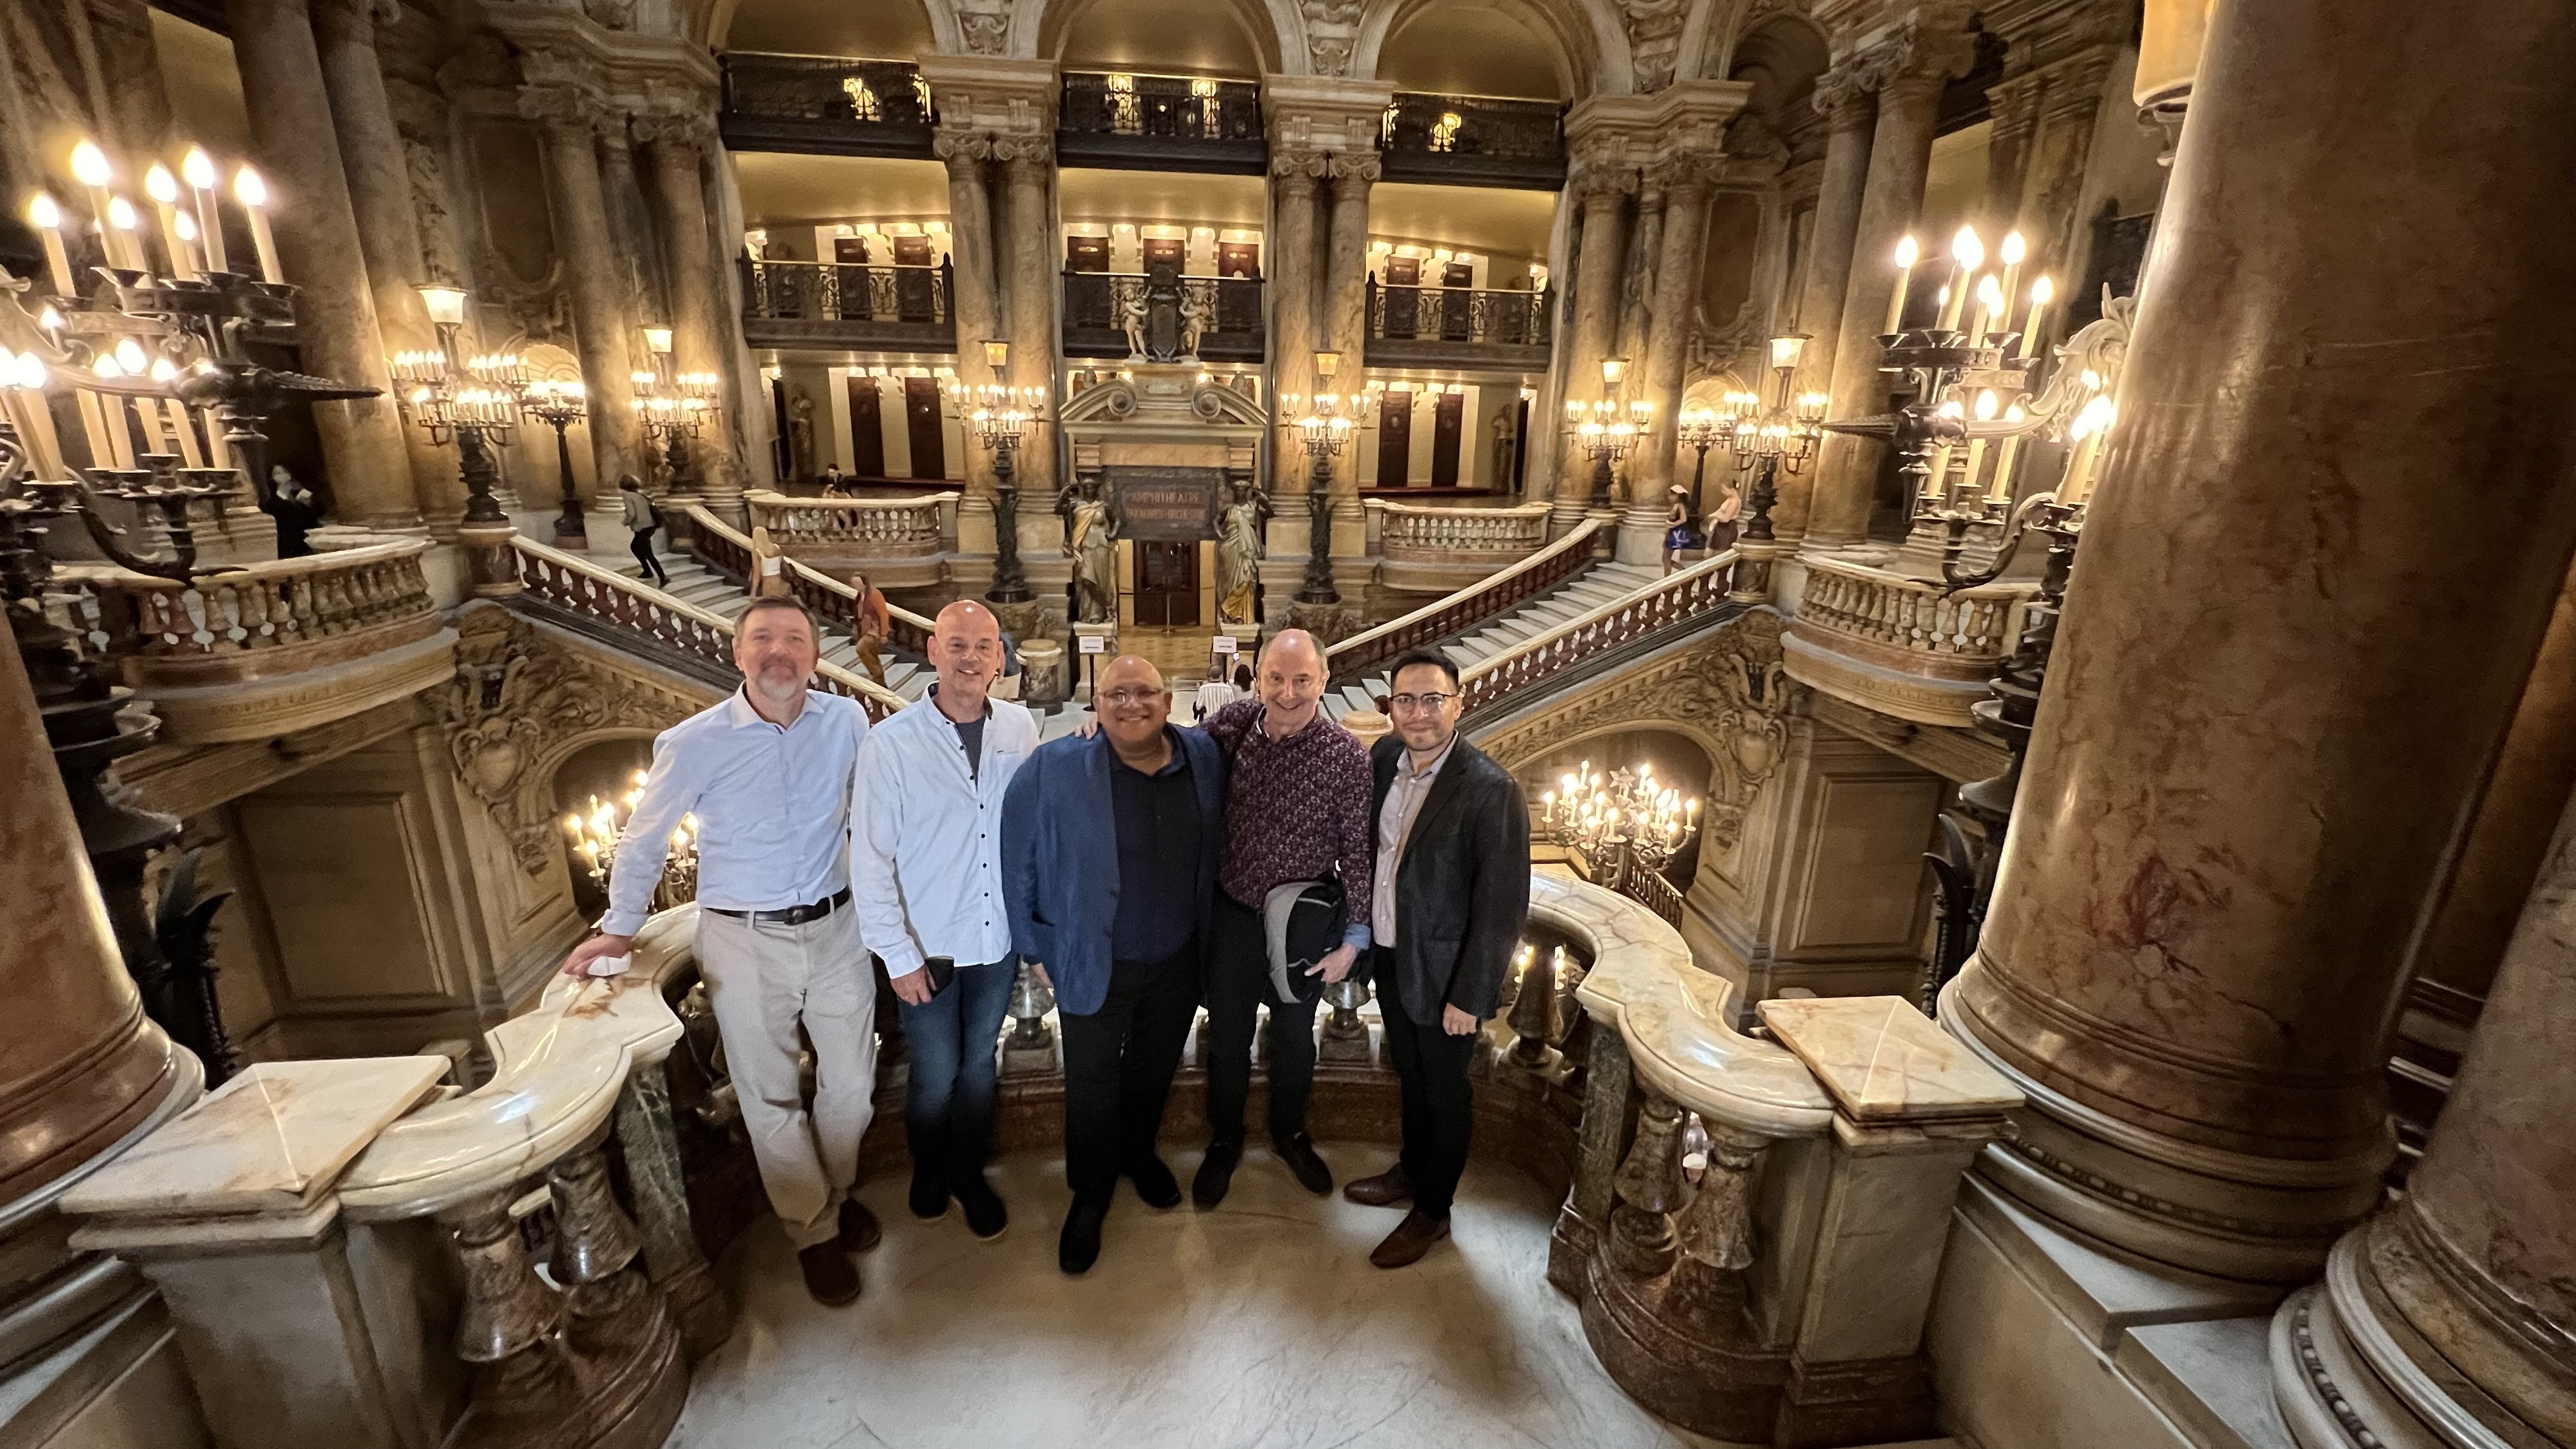 The Orchestra’s clarinet section (l to r: Associate Principal Clarinet Samuel Caviezel, bass clarinet Paul Demers, Principal Clarinet Ricardo Morales, and Socrates Villegas) met up with Philippe Cuper (second from right), principal clarinet of the Opera National de Paris Orchestra